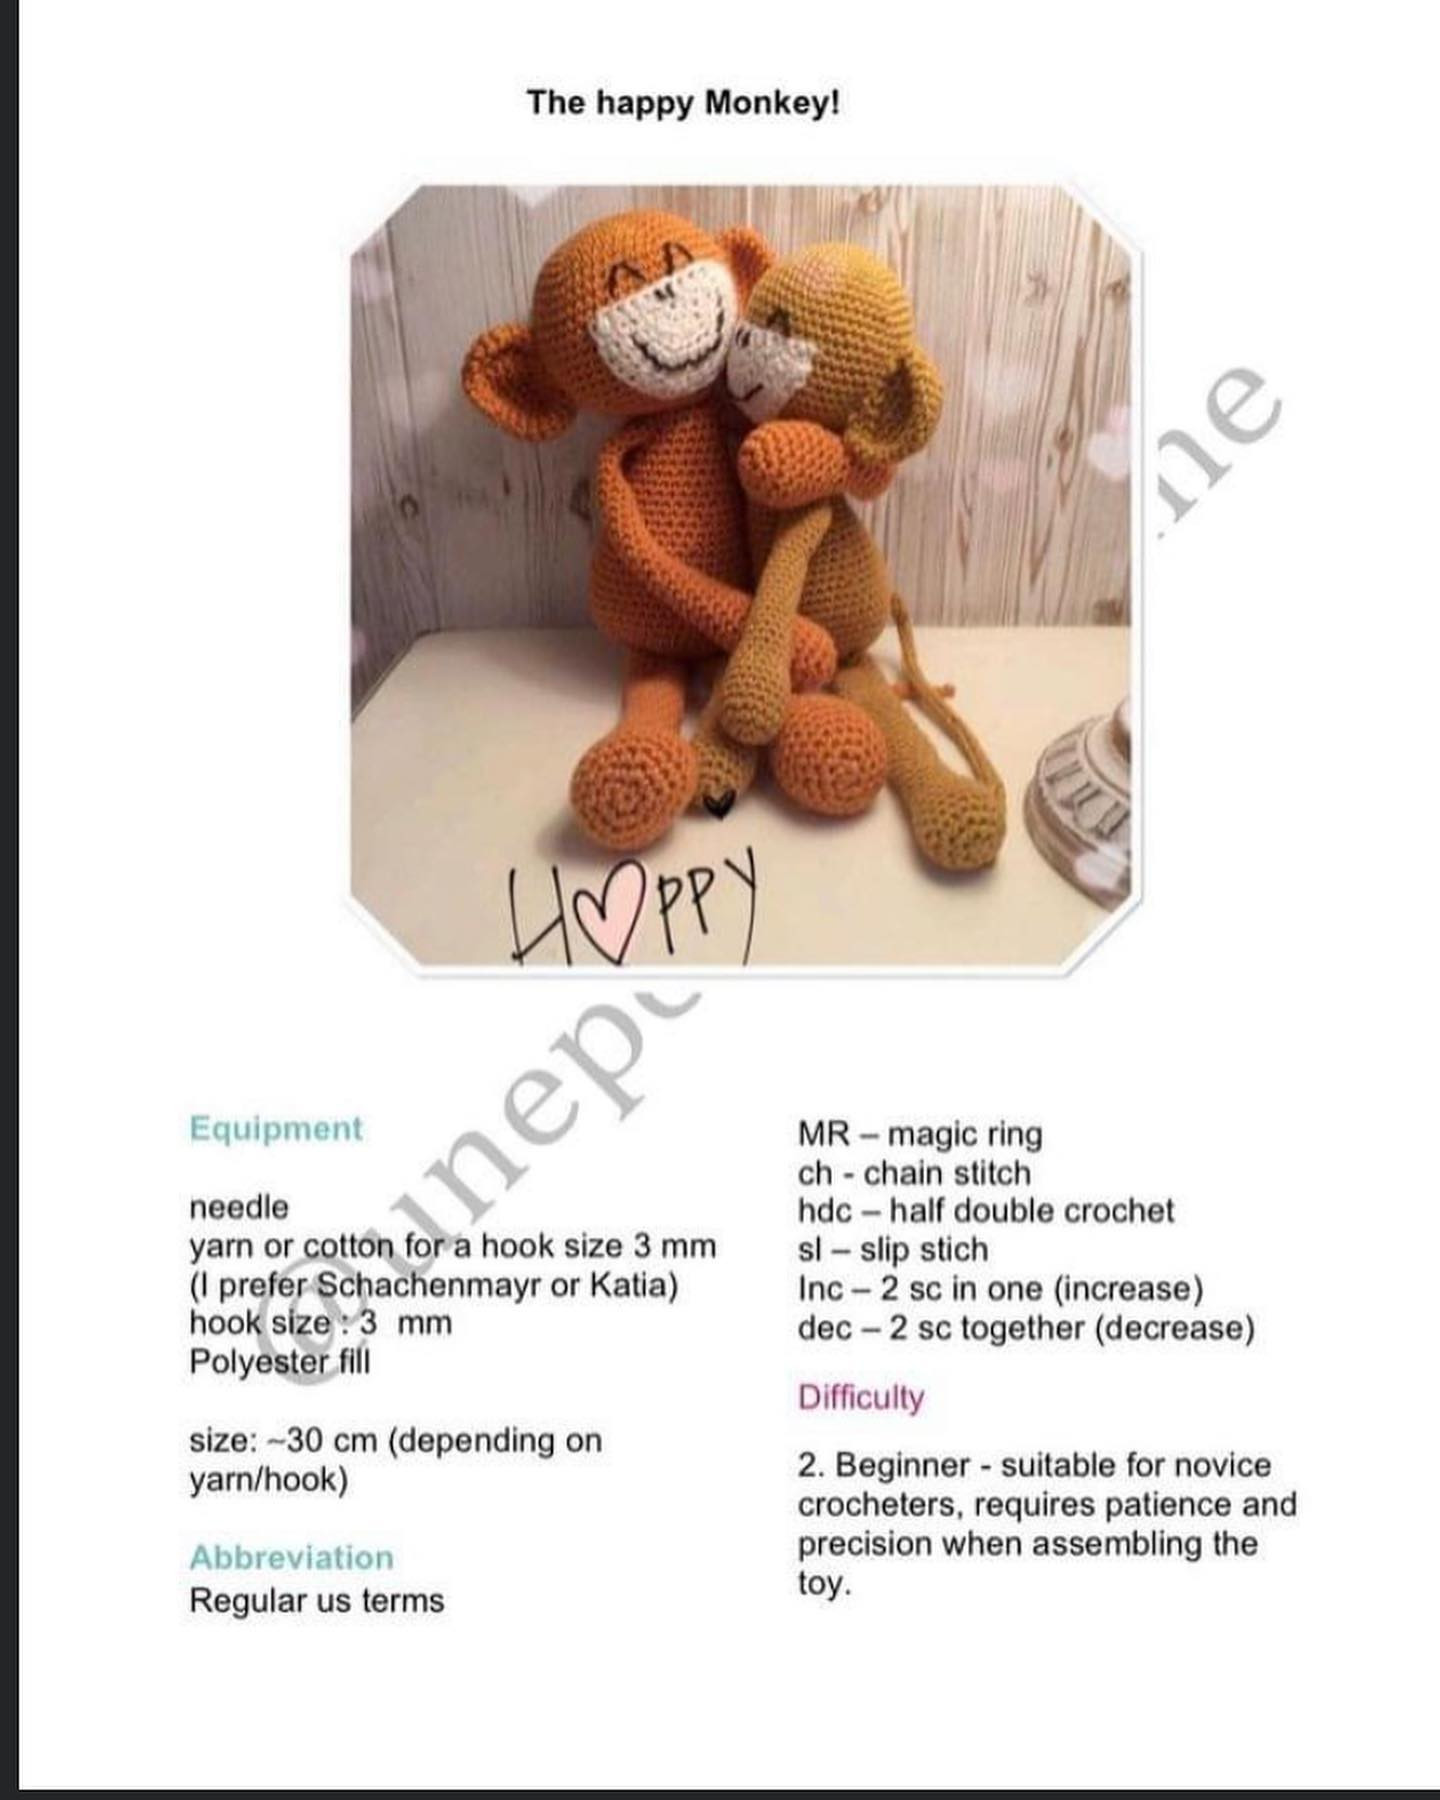 Monkey crochet pattern with big ears, long sleeves and long legs